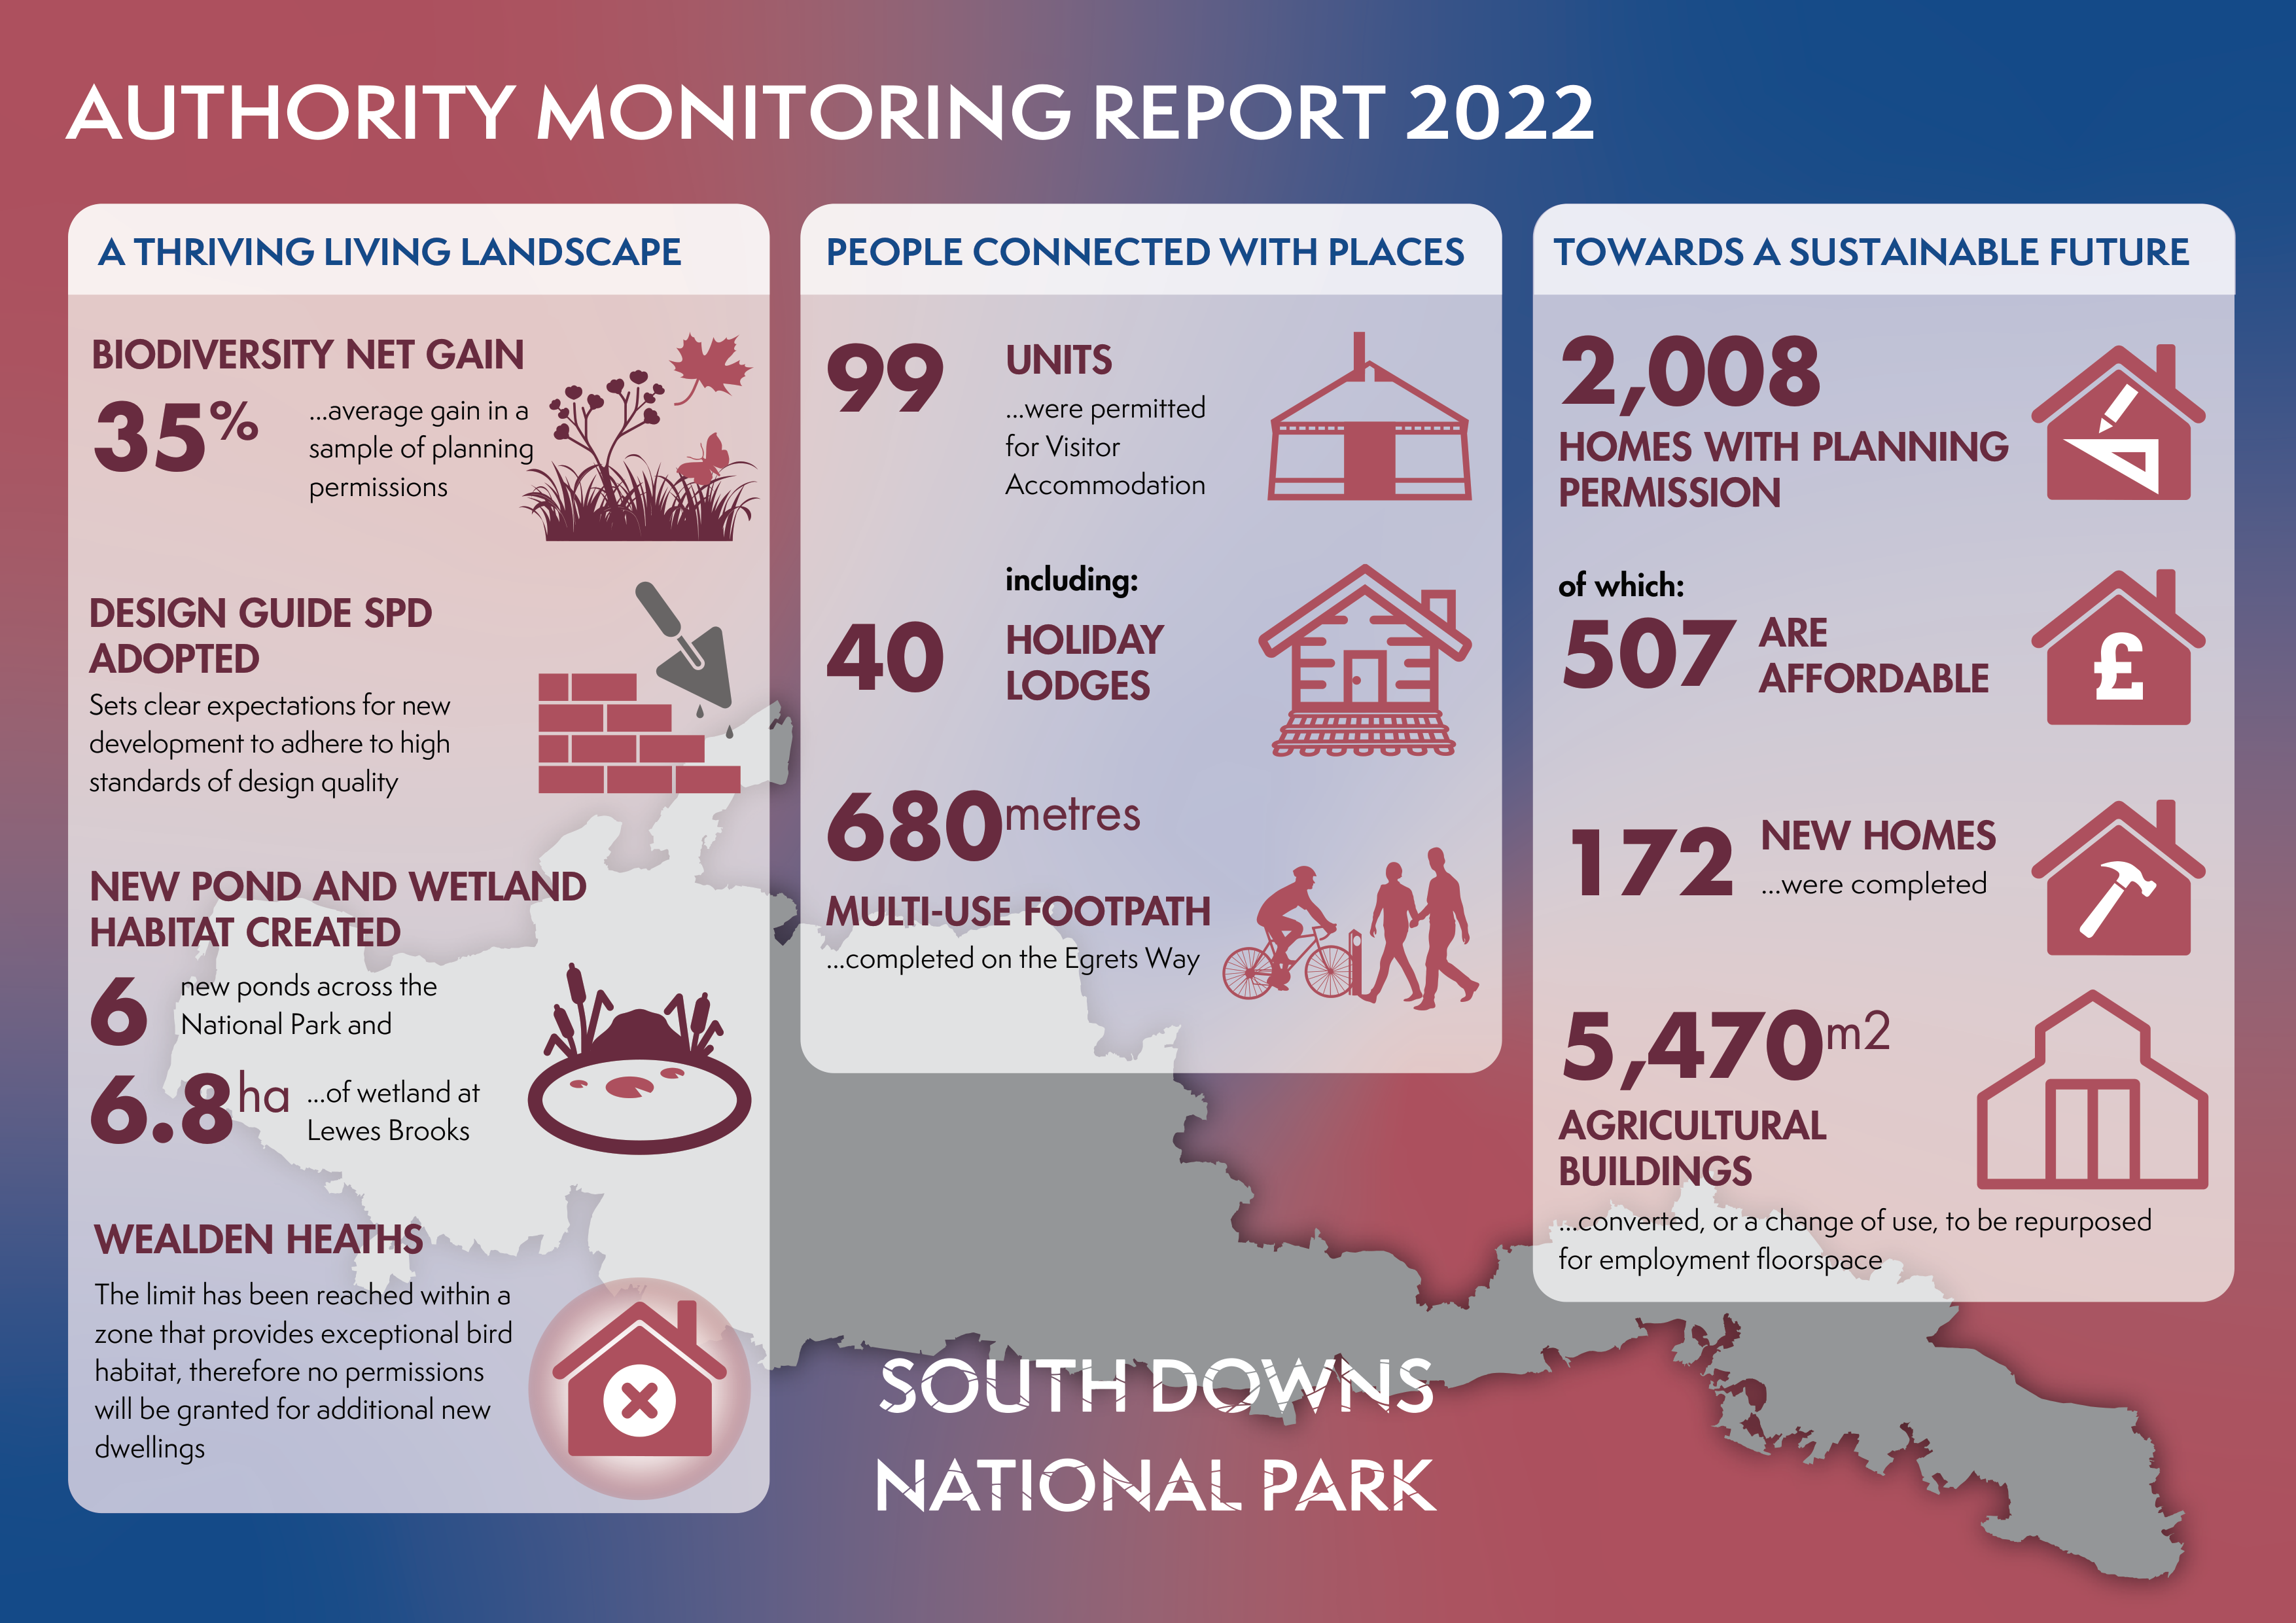 Infographic showing the topline figures from this year's Authority Monitoring Report. All figures are in the downloadable document.